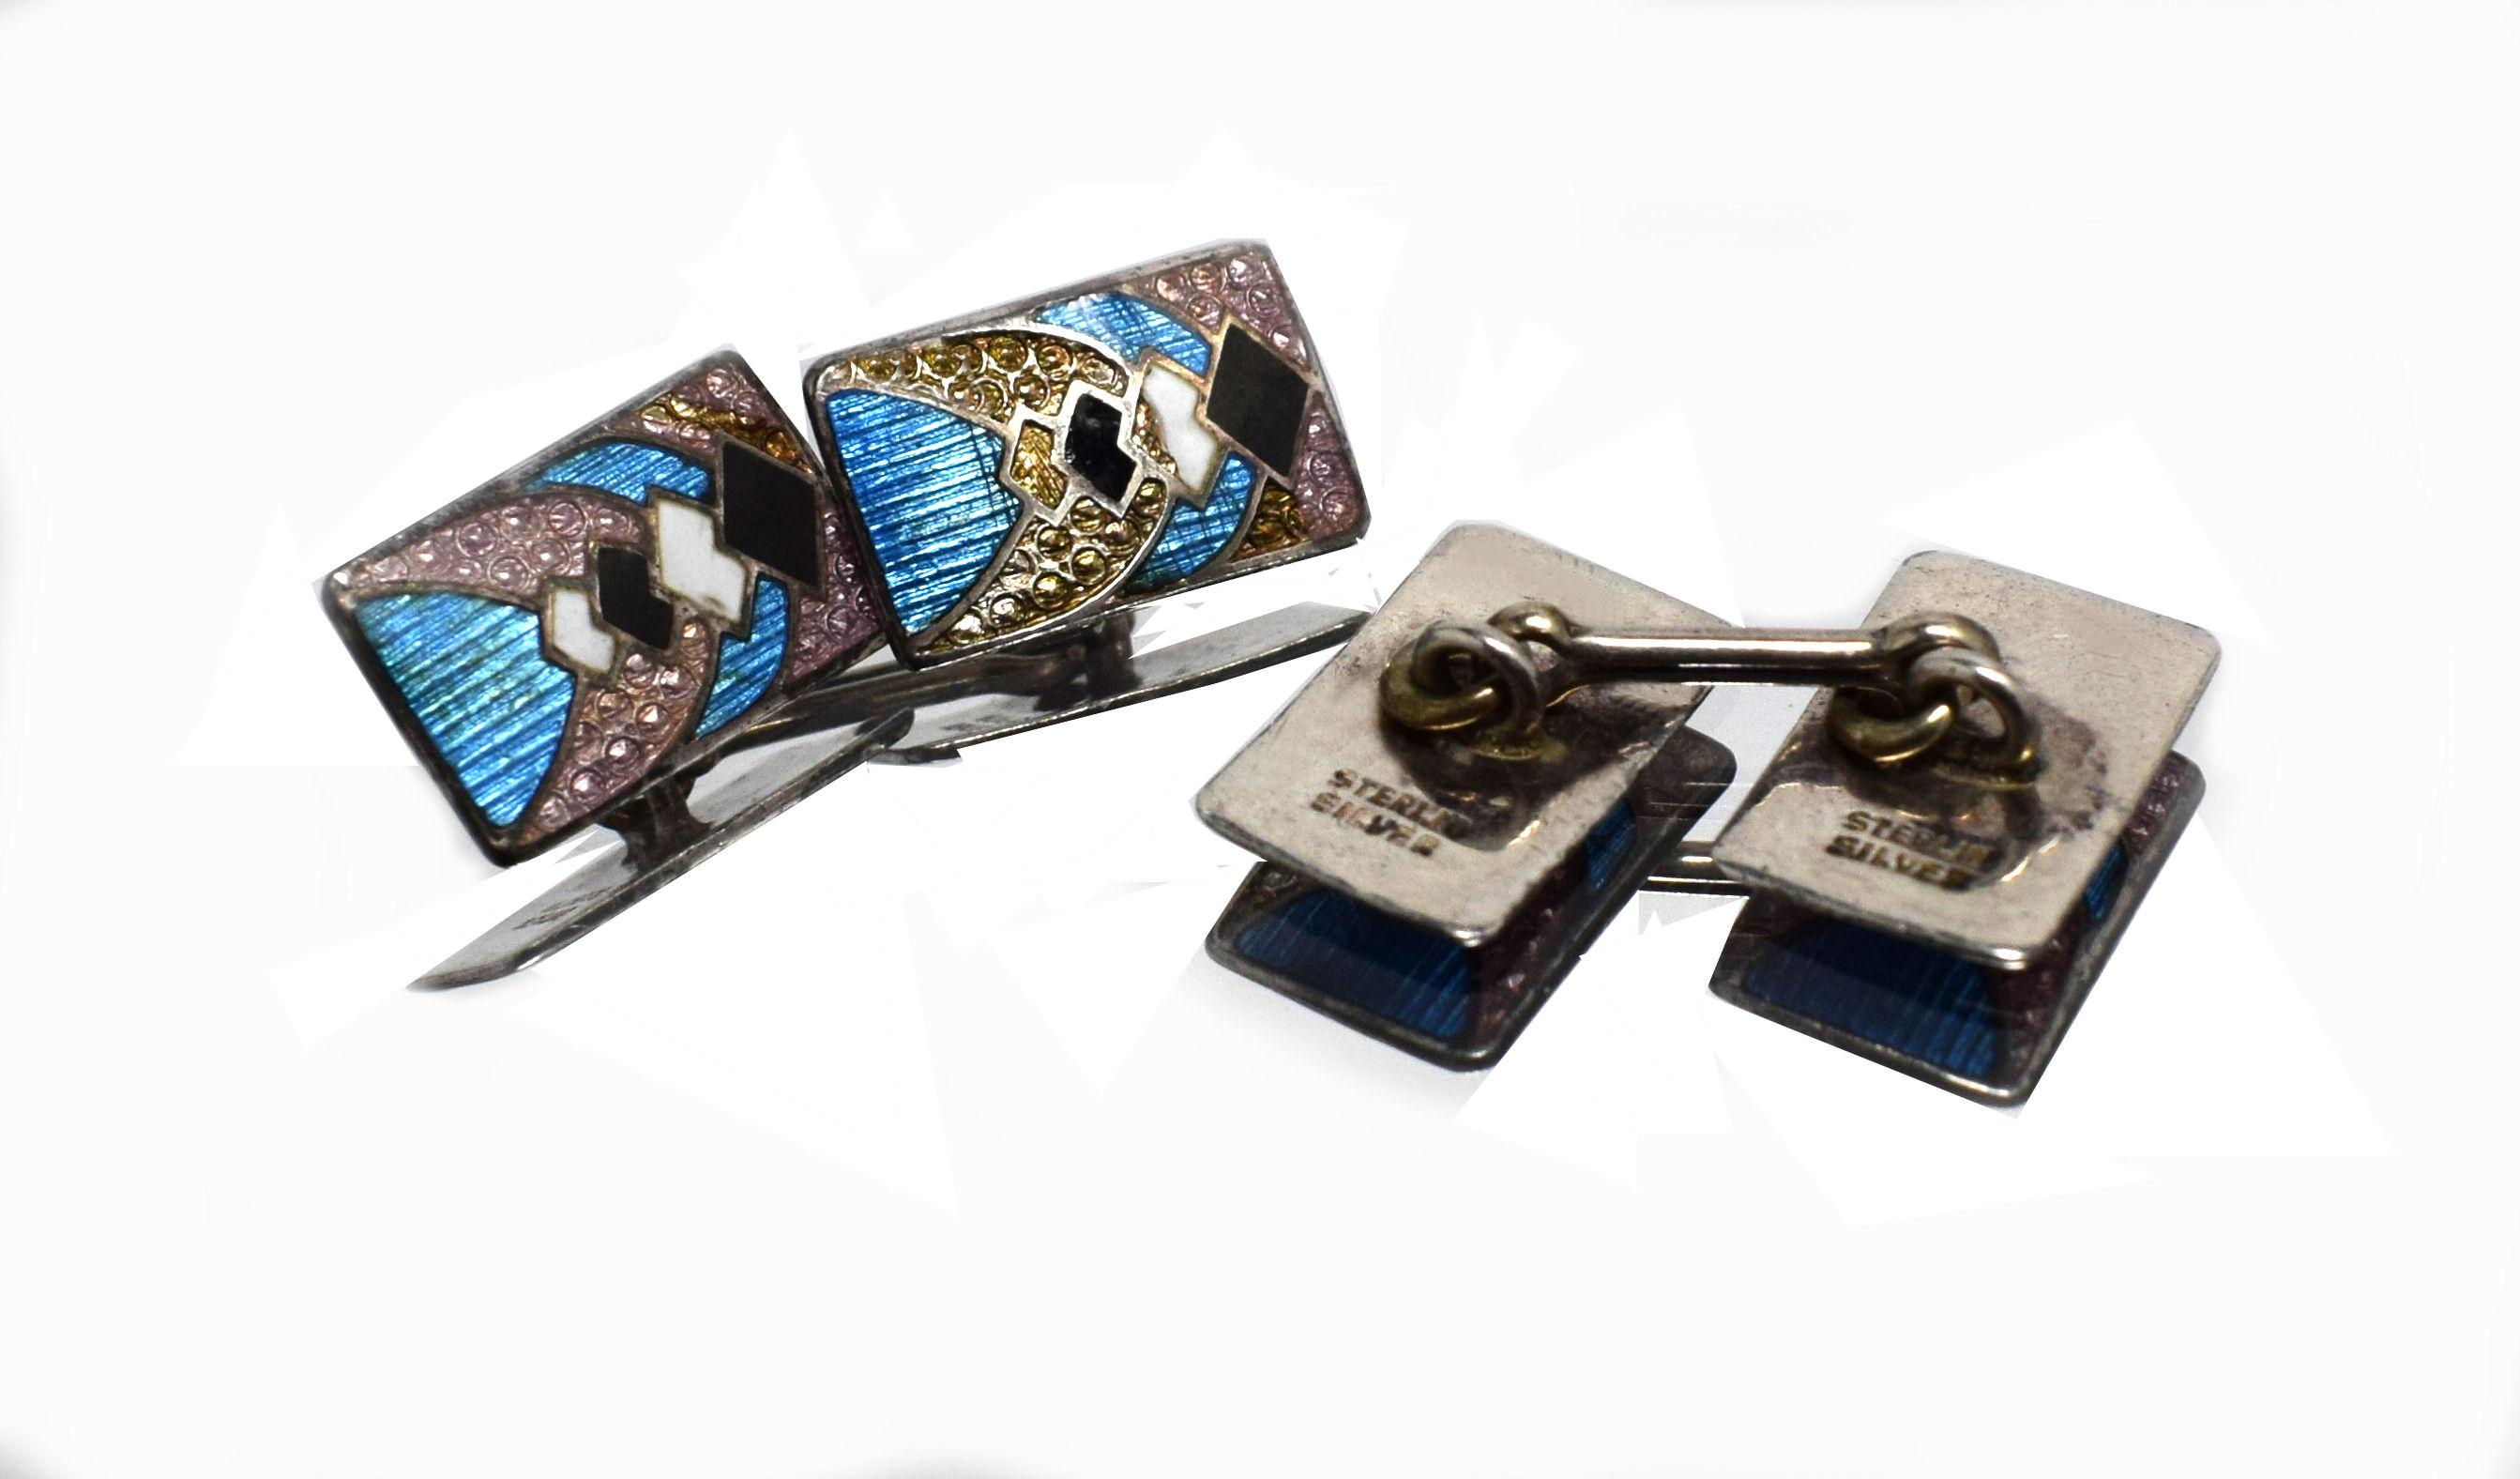 For your consideration are these rare and fabulously styled Art Deco geometric Guilloche enamel and sterling silver cufflinks. English made double cufflinks which feature the most dramatic geometric Art Deco design in black, white, lilac and